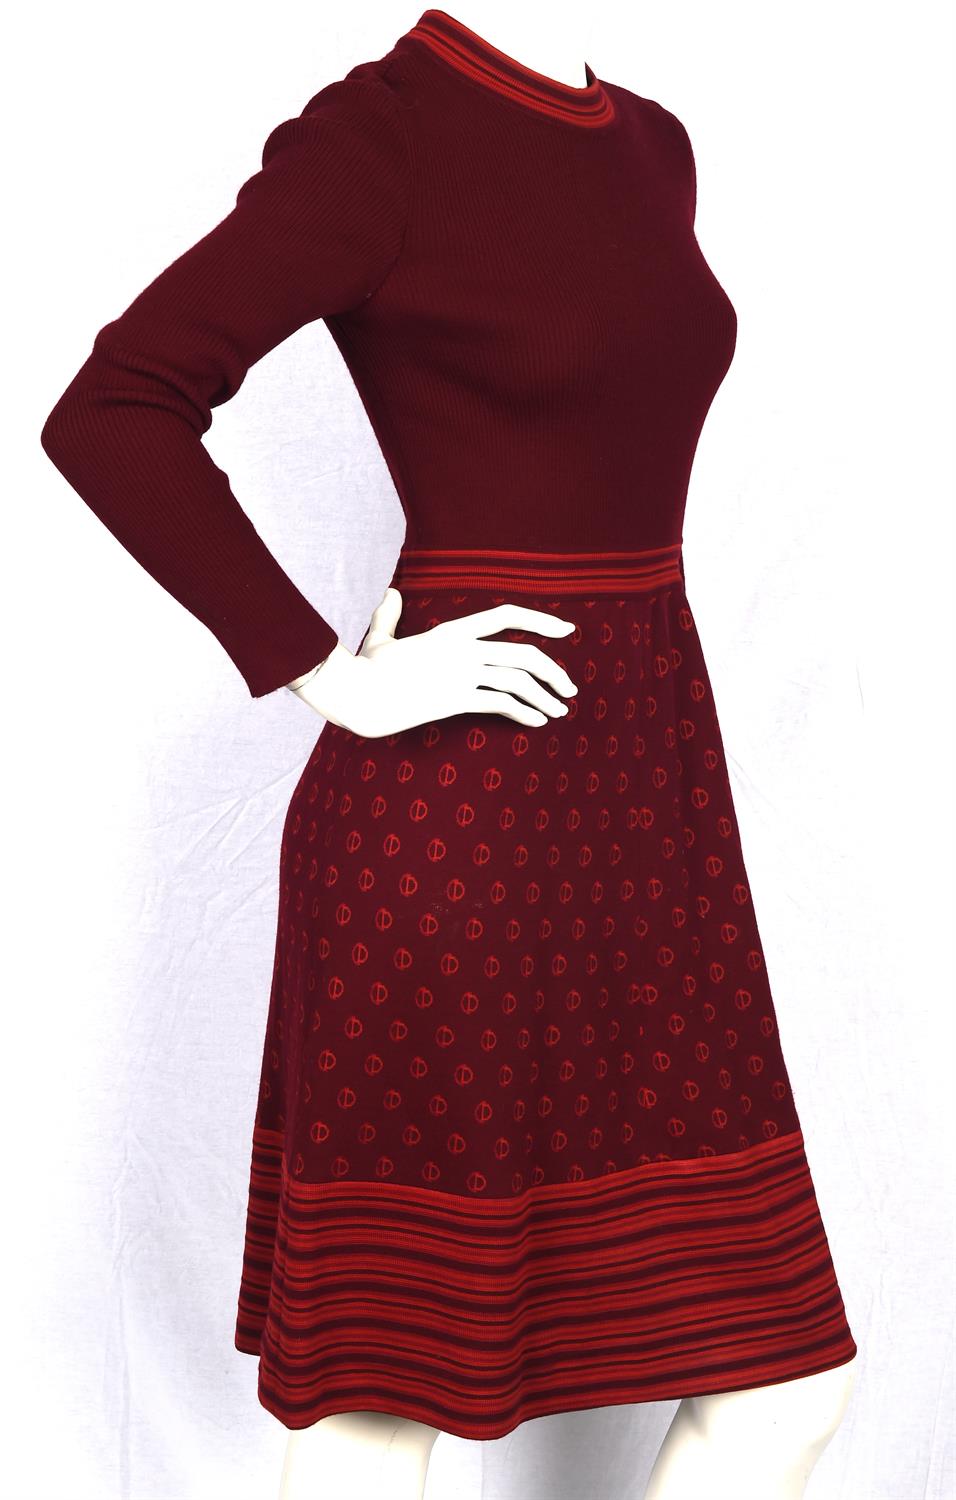 CHRISTIAN DIOR DIORLING 1970s knitted wool dress in burgundy and orange. Fits UK10 * CHRISTIAN DIOR - Image 3 of 13